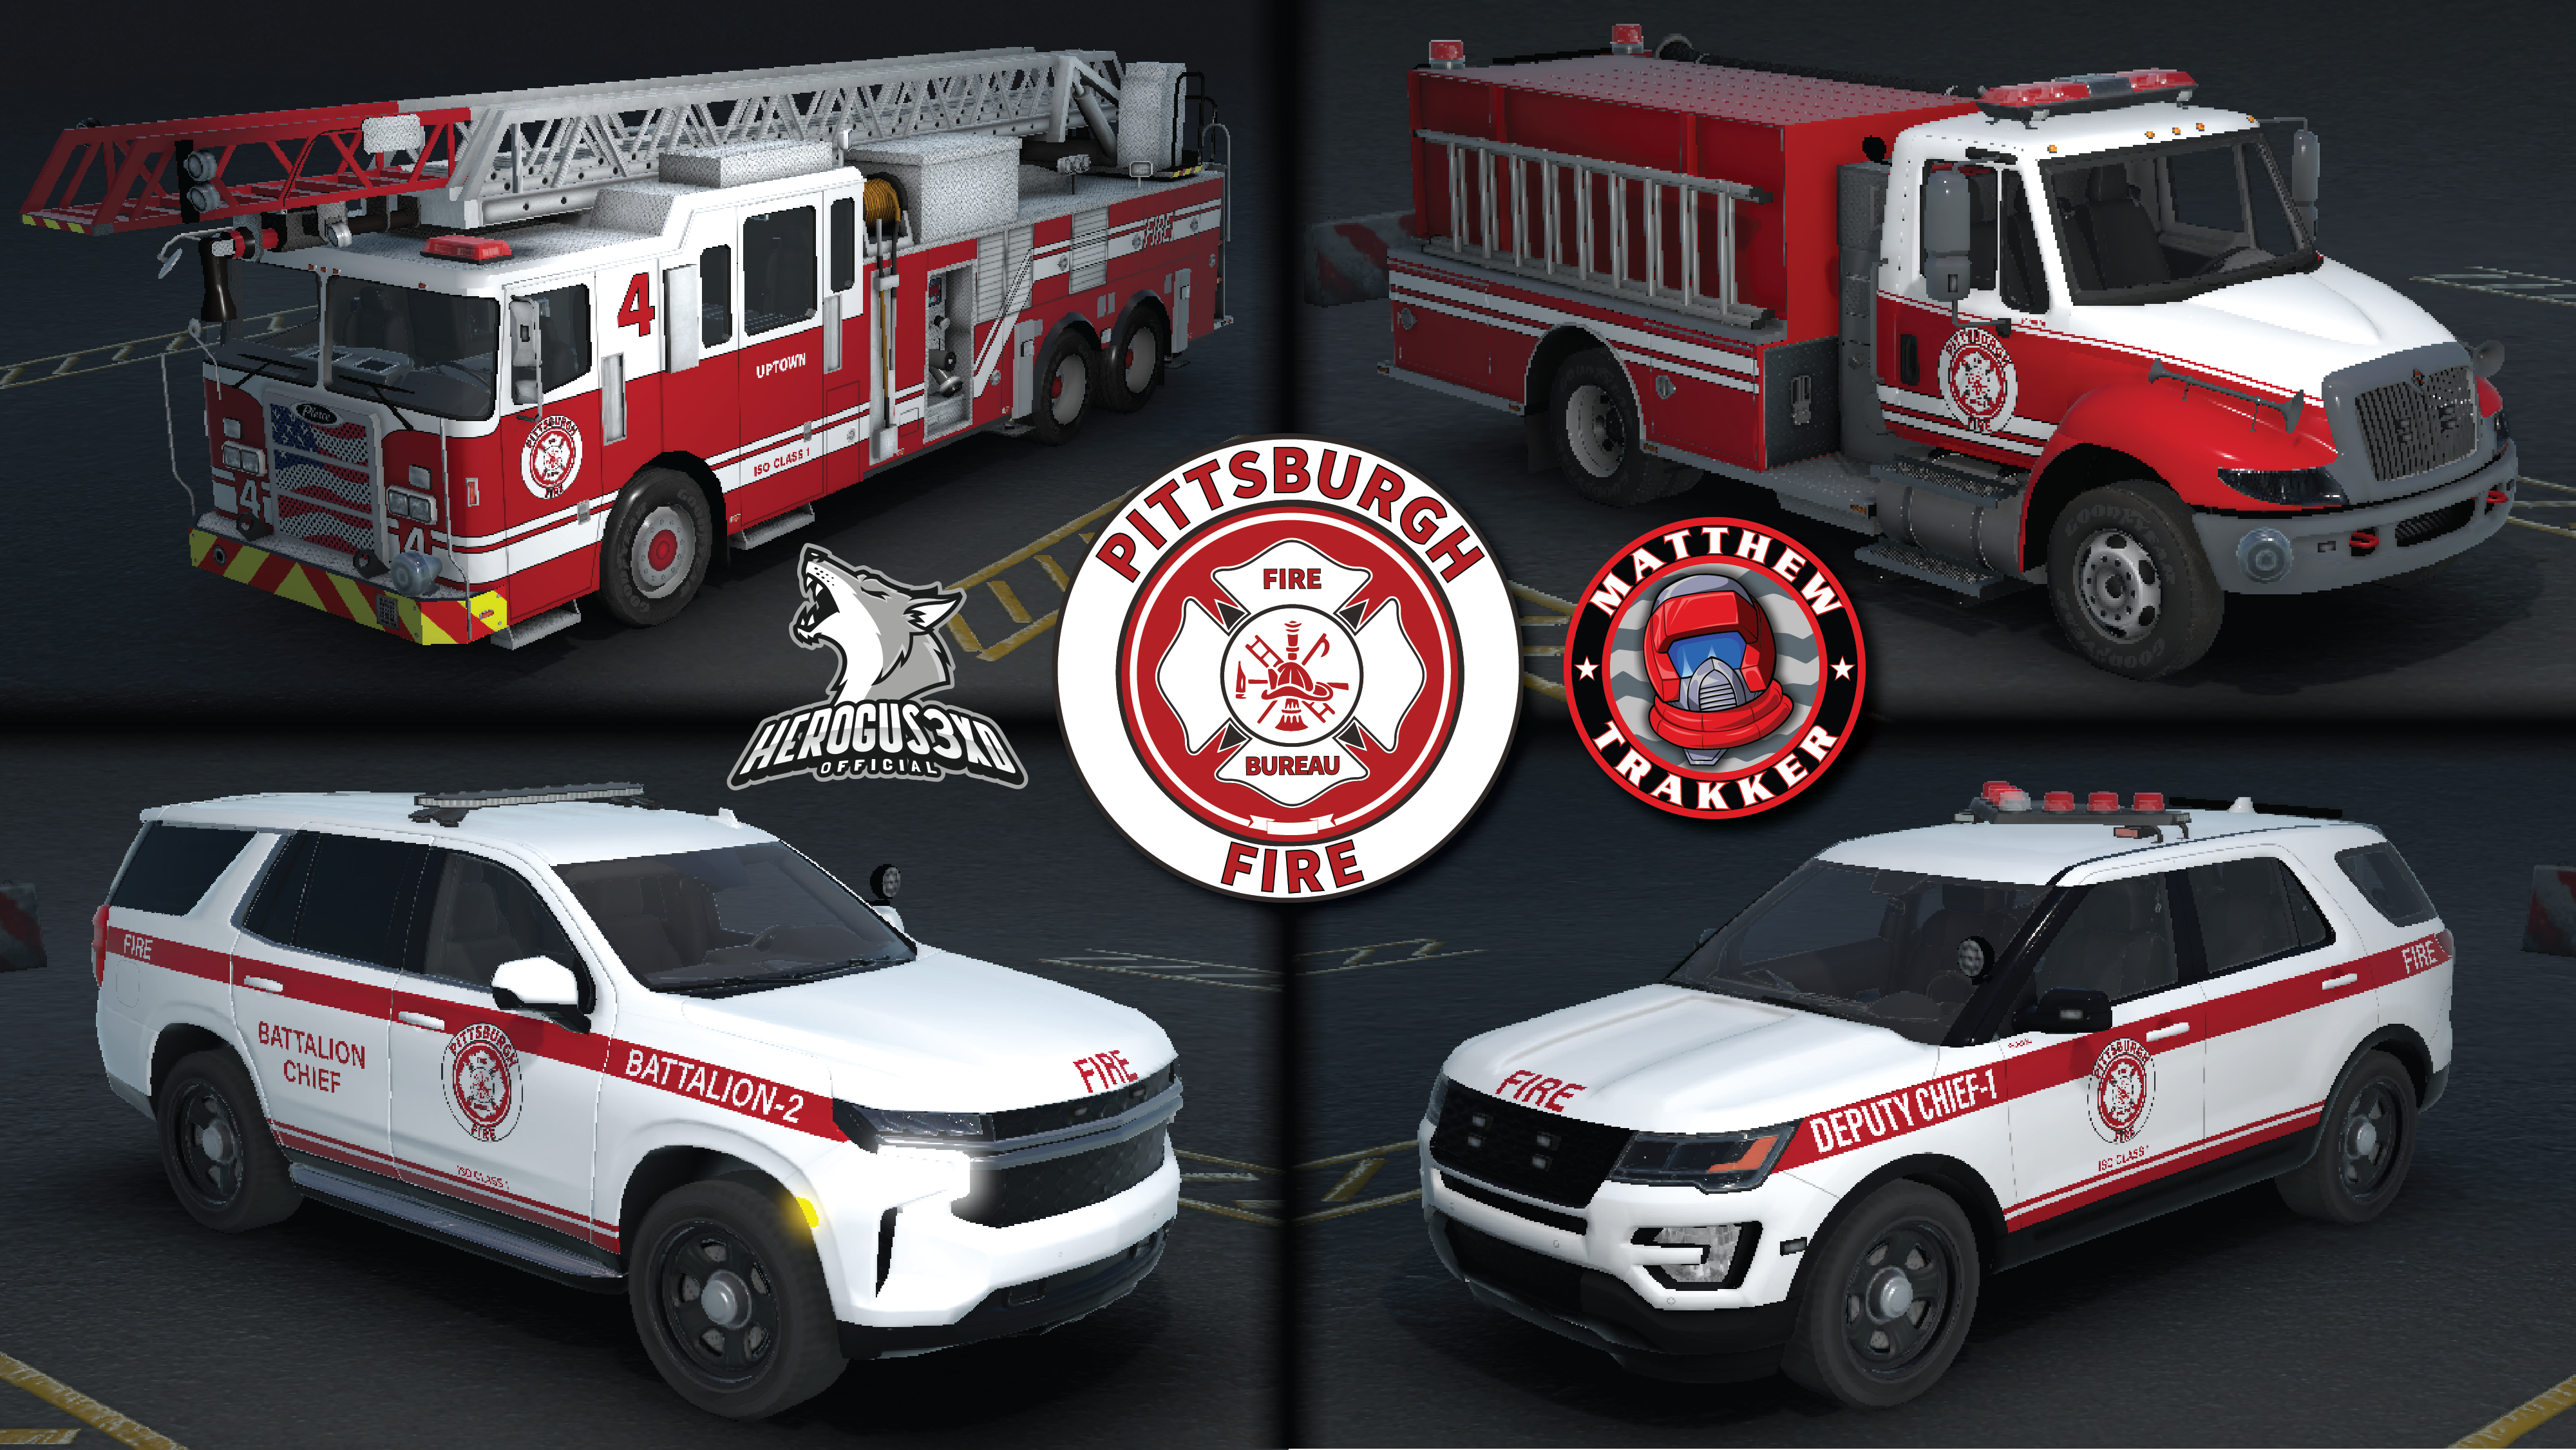 More information about "Pittsburgh Fire Department Vehicles - Pittsburgh, PA"